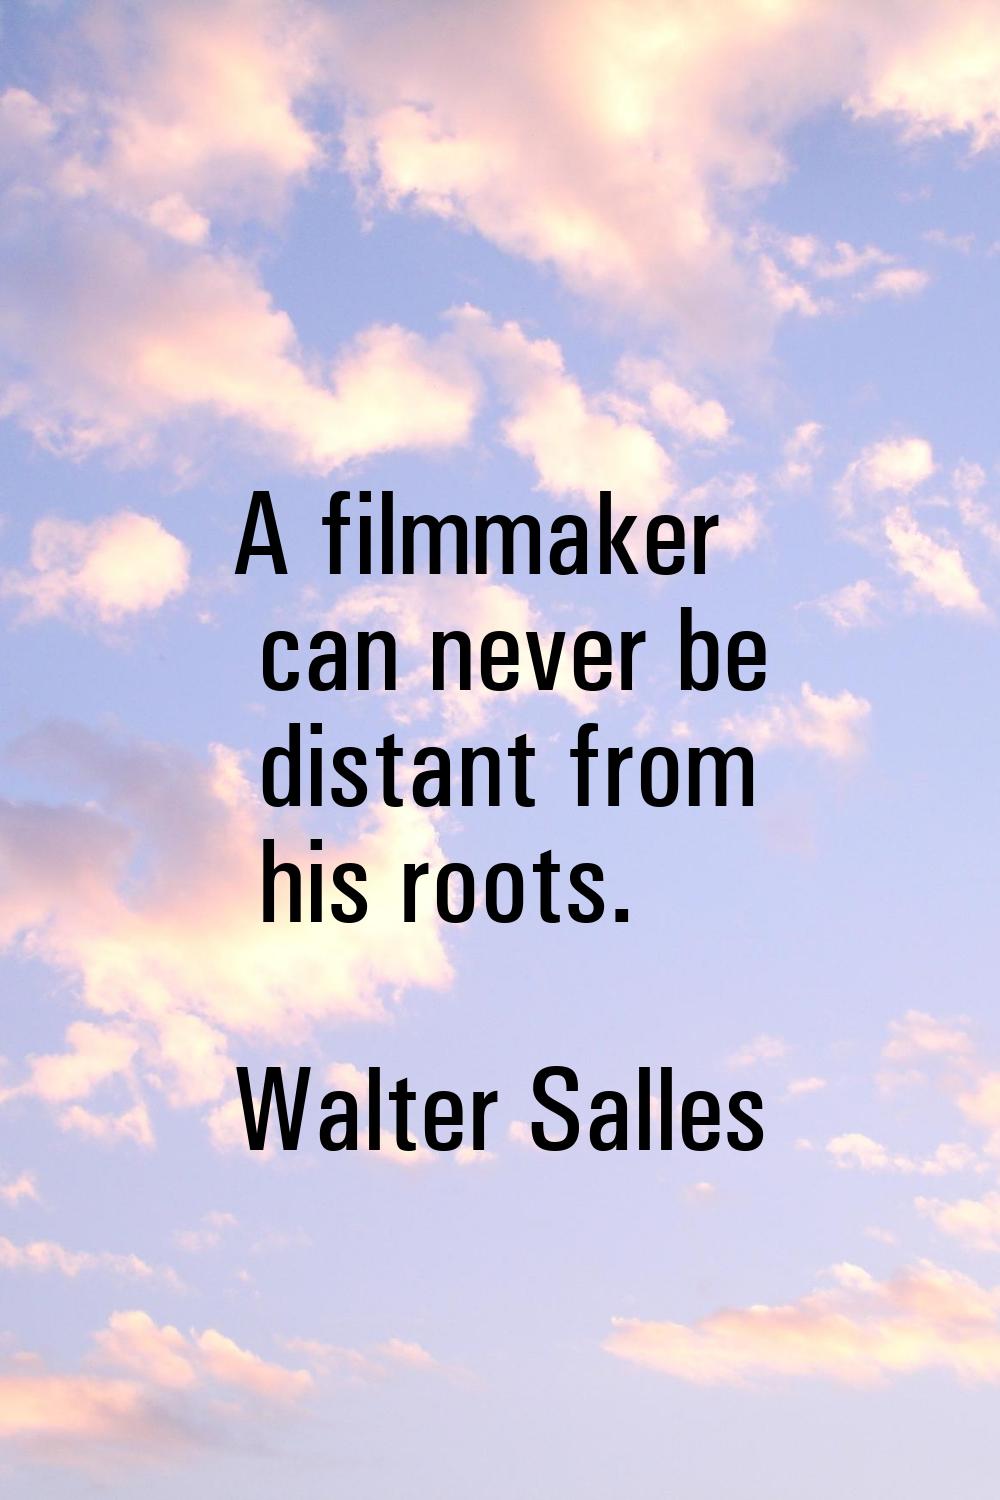 A filmmaker can never be distant from his roots.